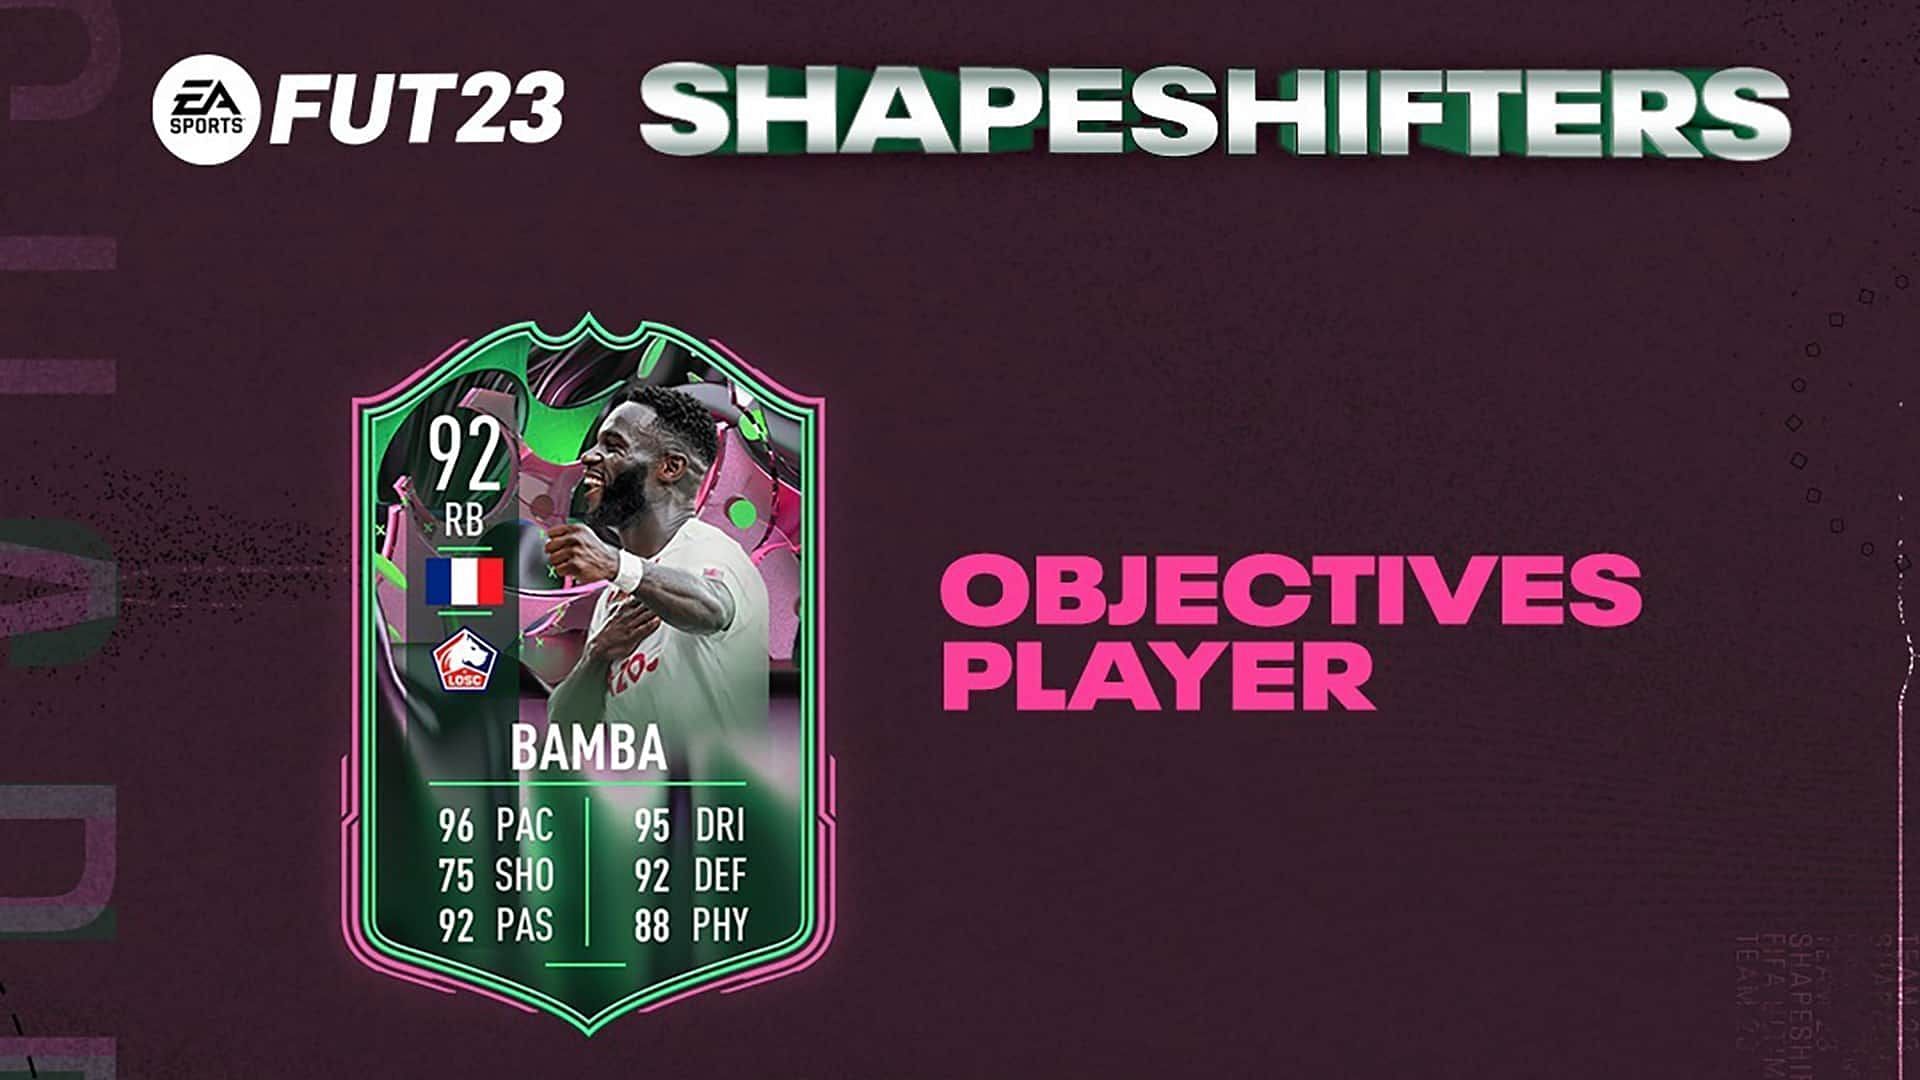 The Jonathan Bamba Shapeshifters card is available in FIFA 23 (Image via EA Sports)